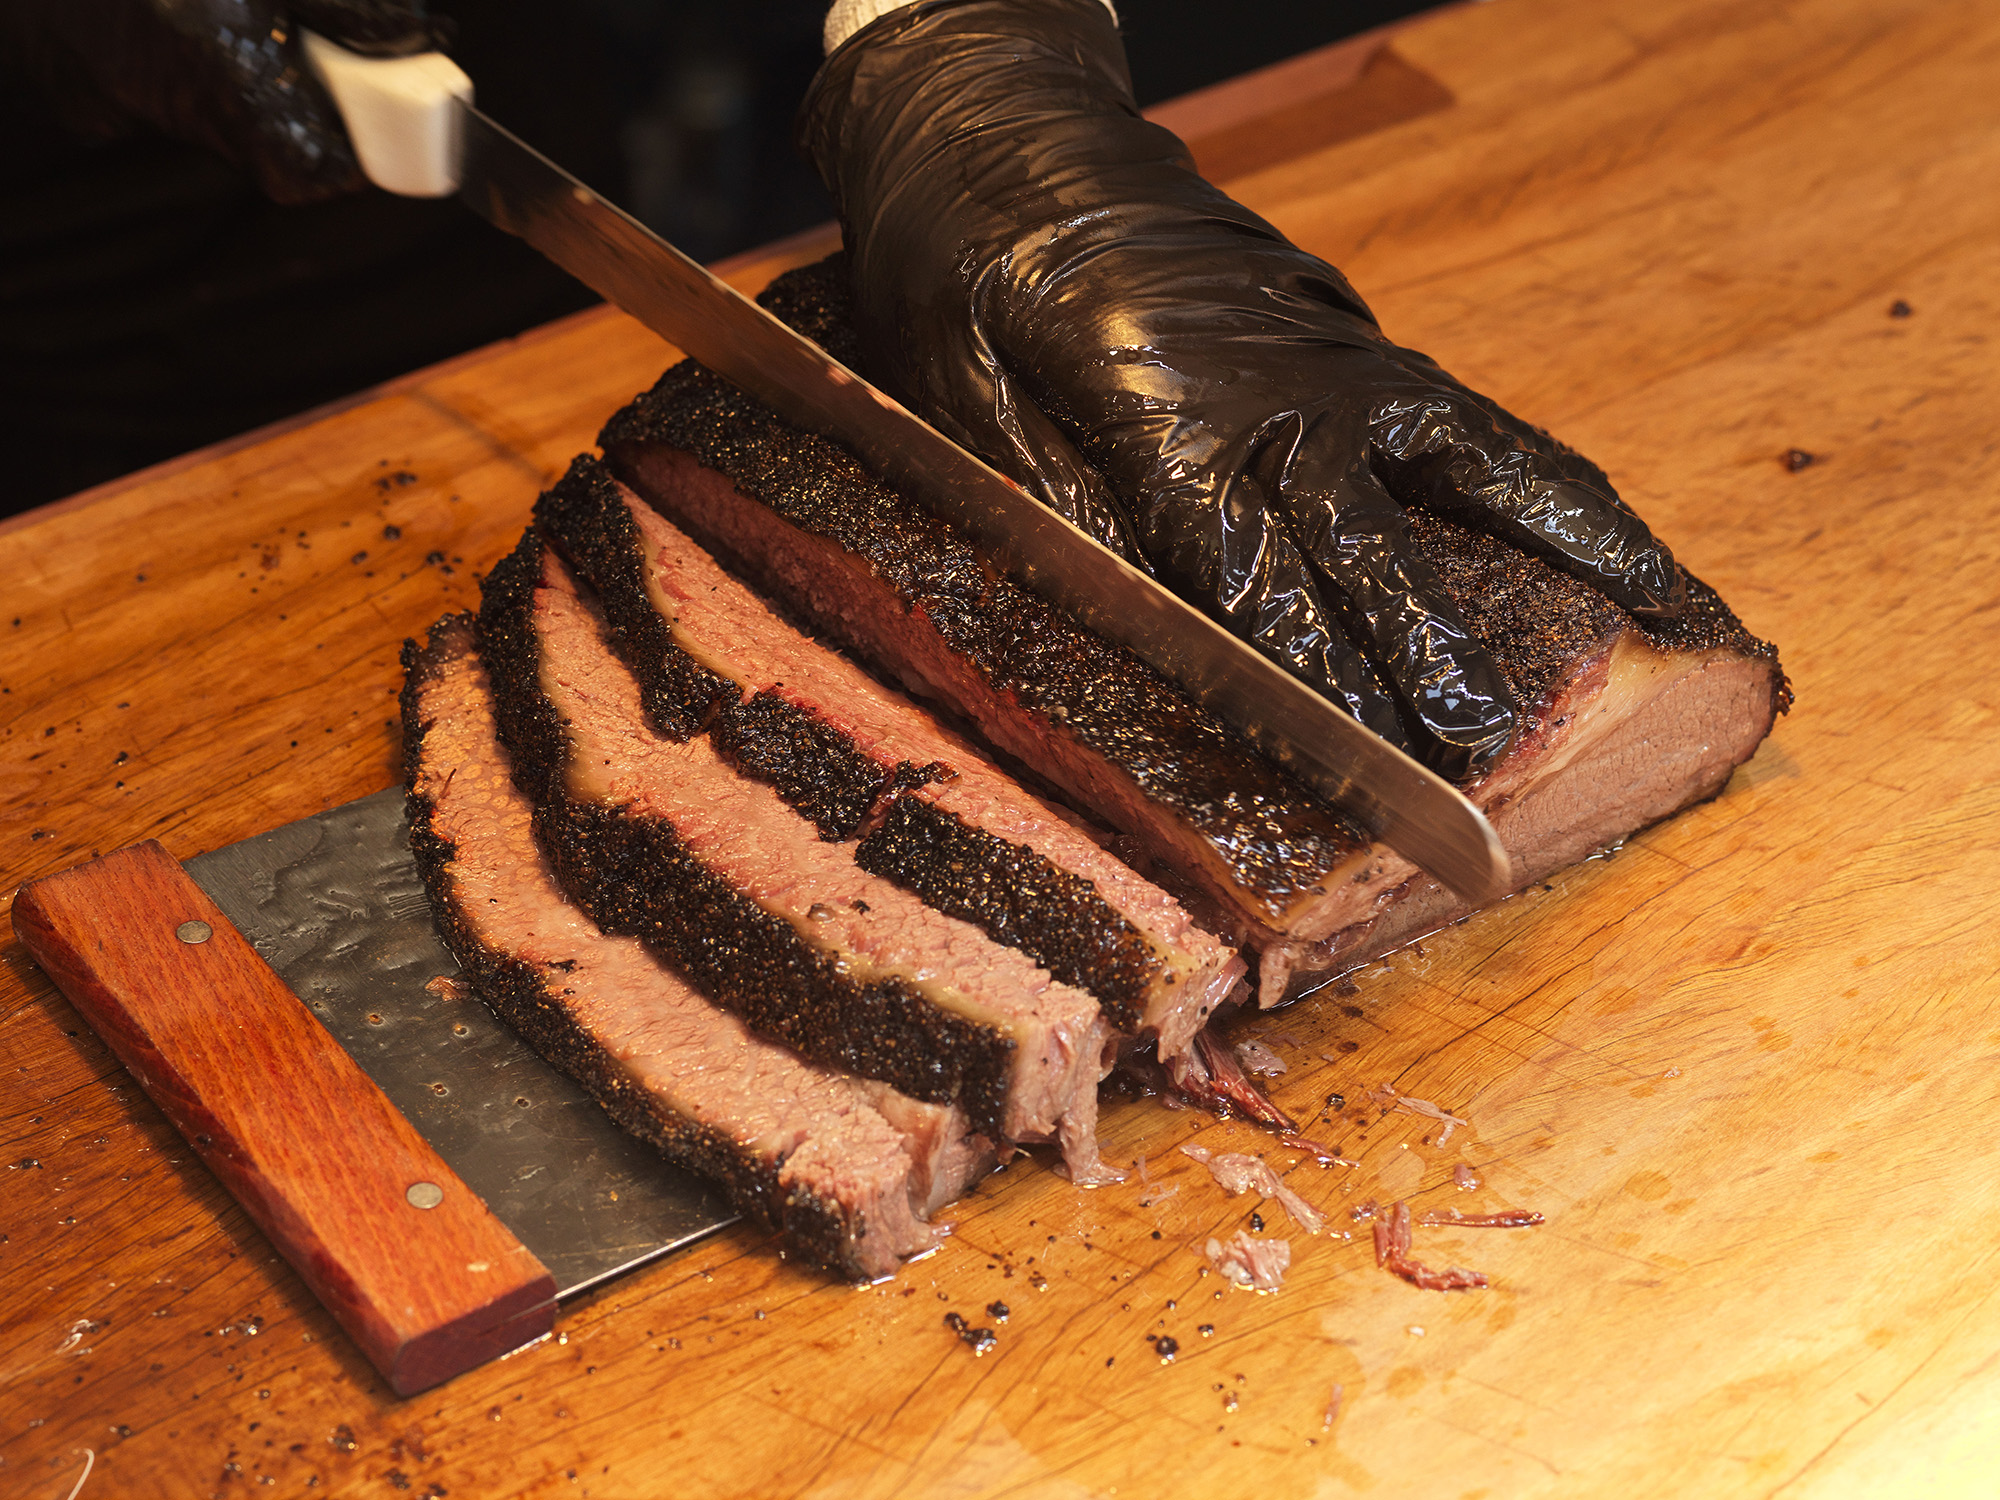 Big Don’s brisket – sliced fresh to order in front of your eyes